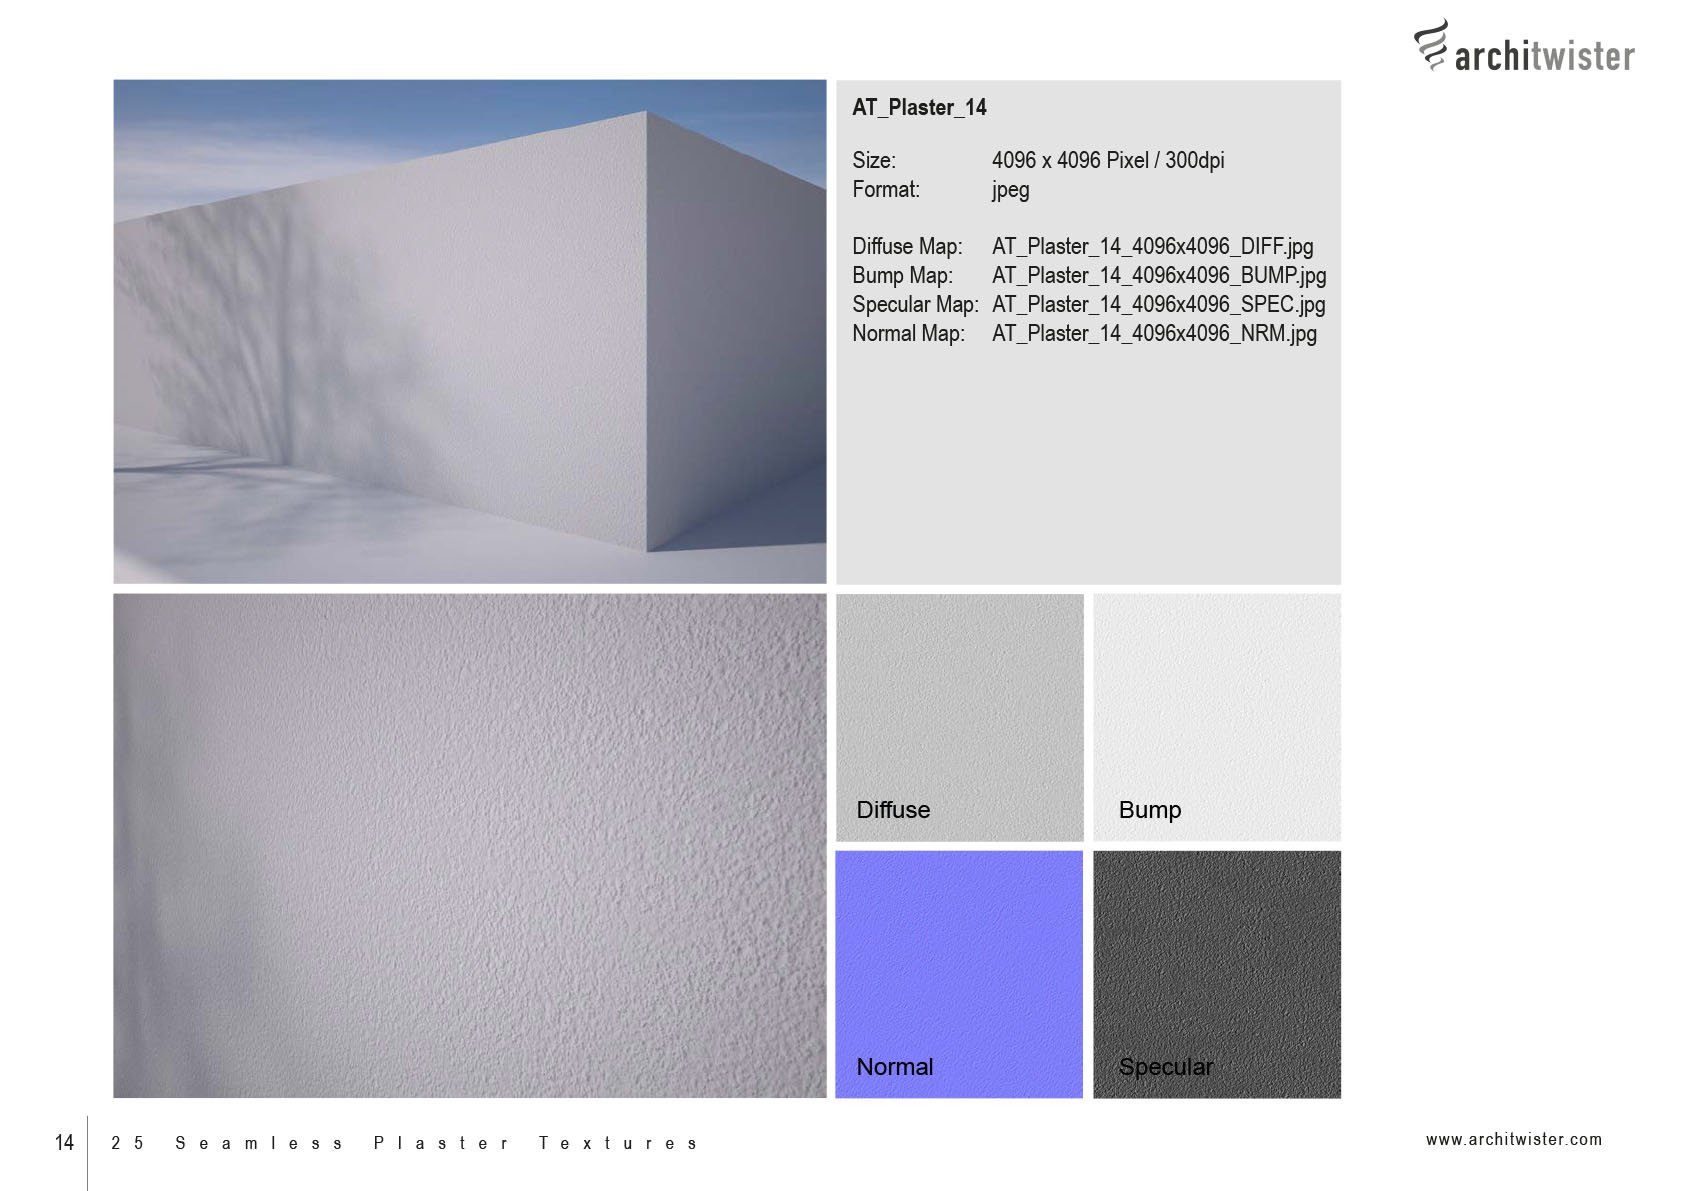 at plaster textures catalog 01 15 717